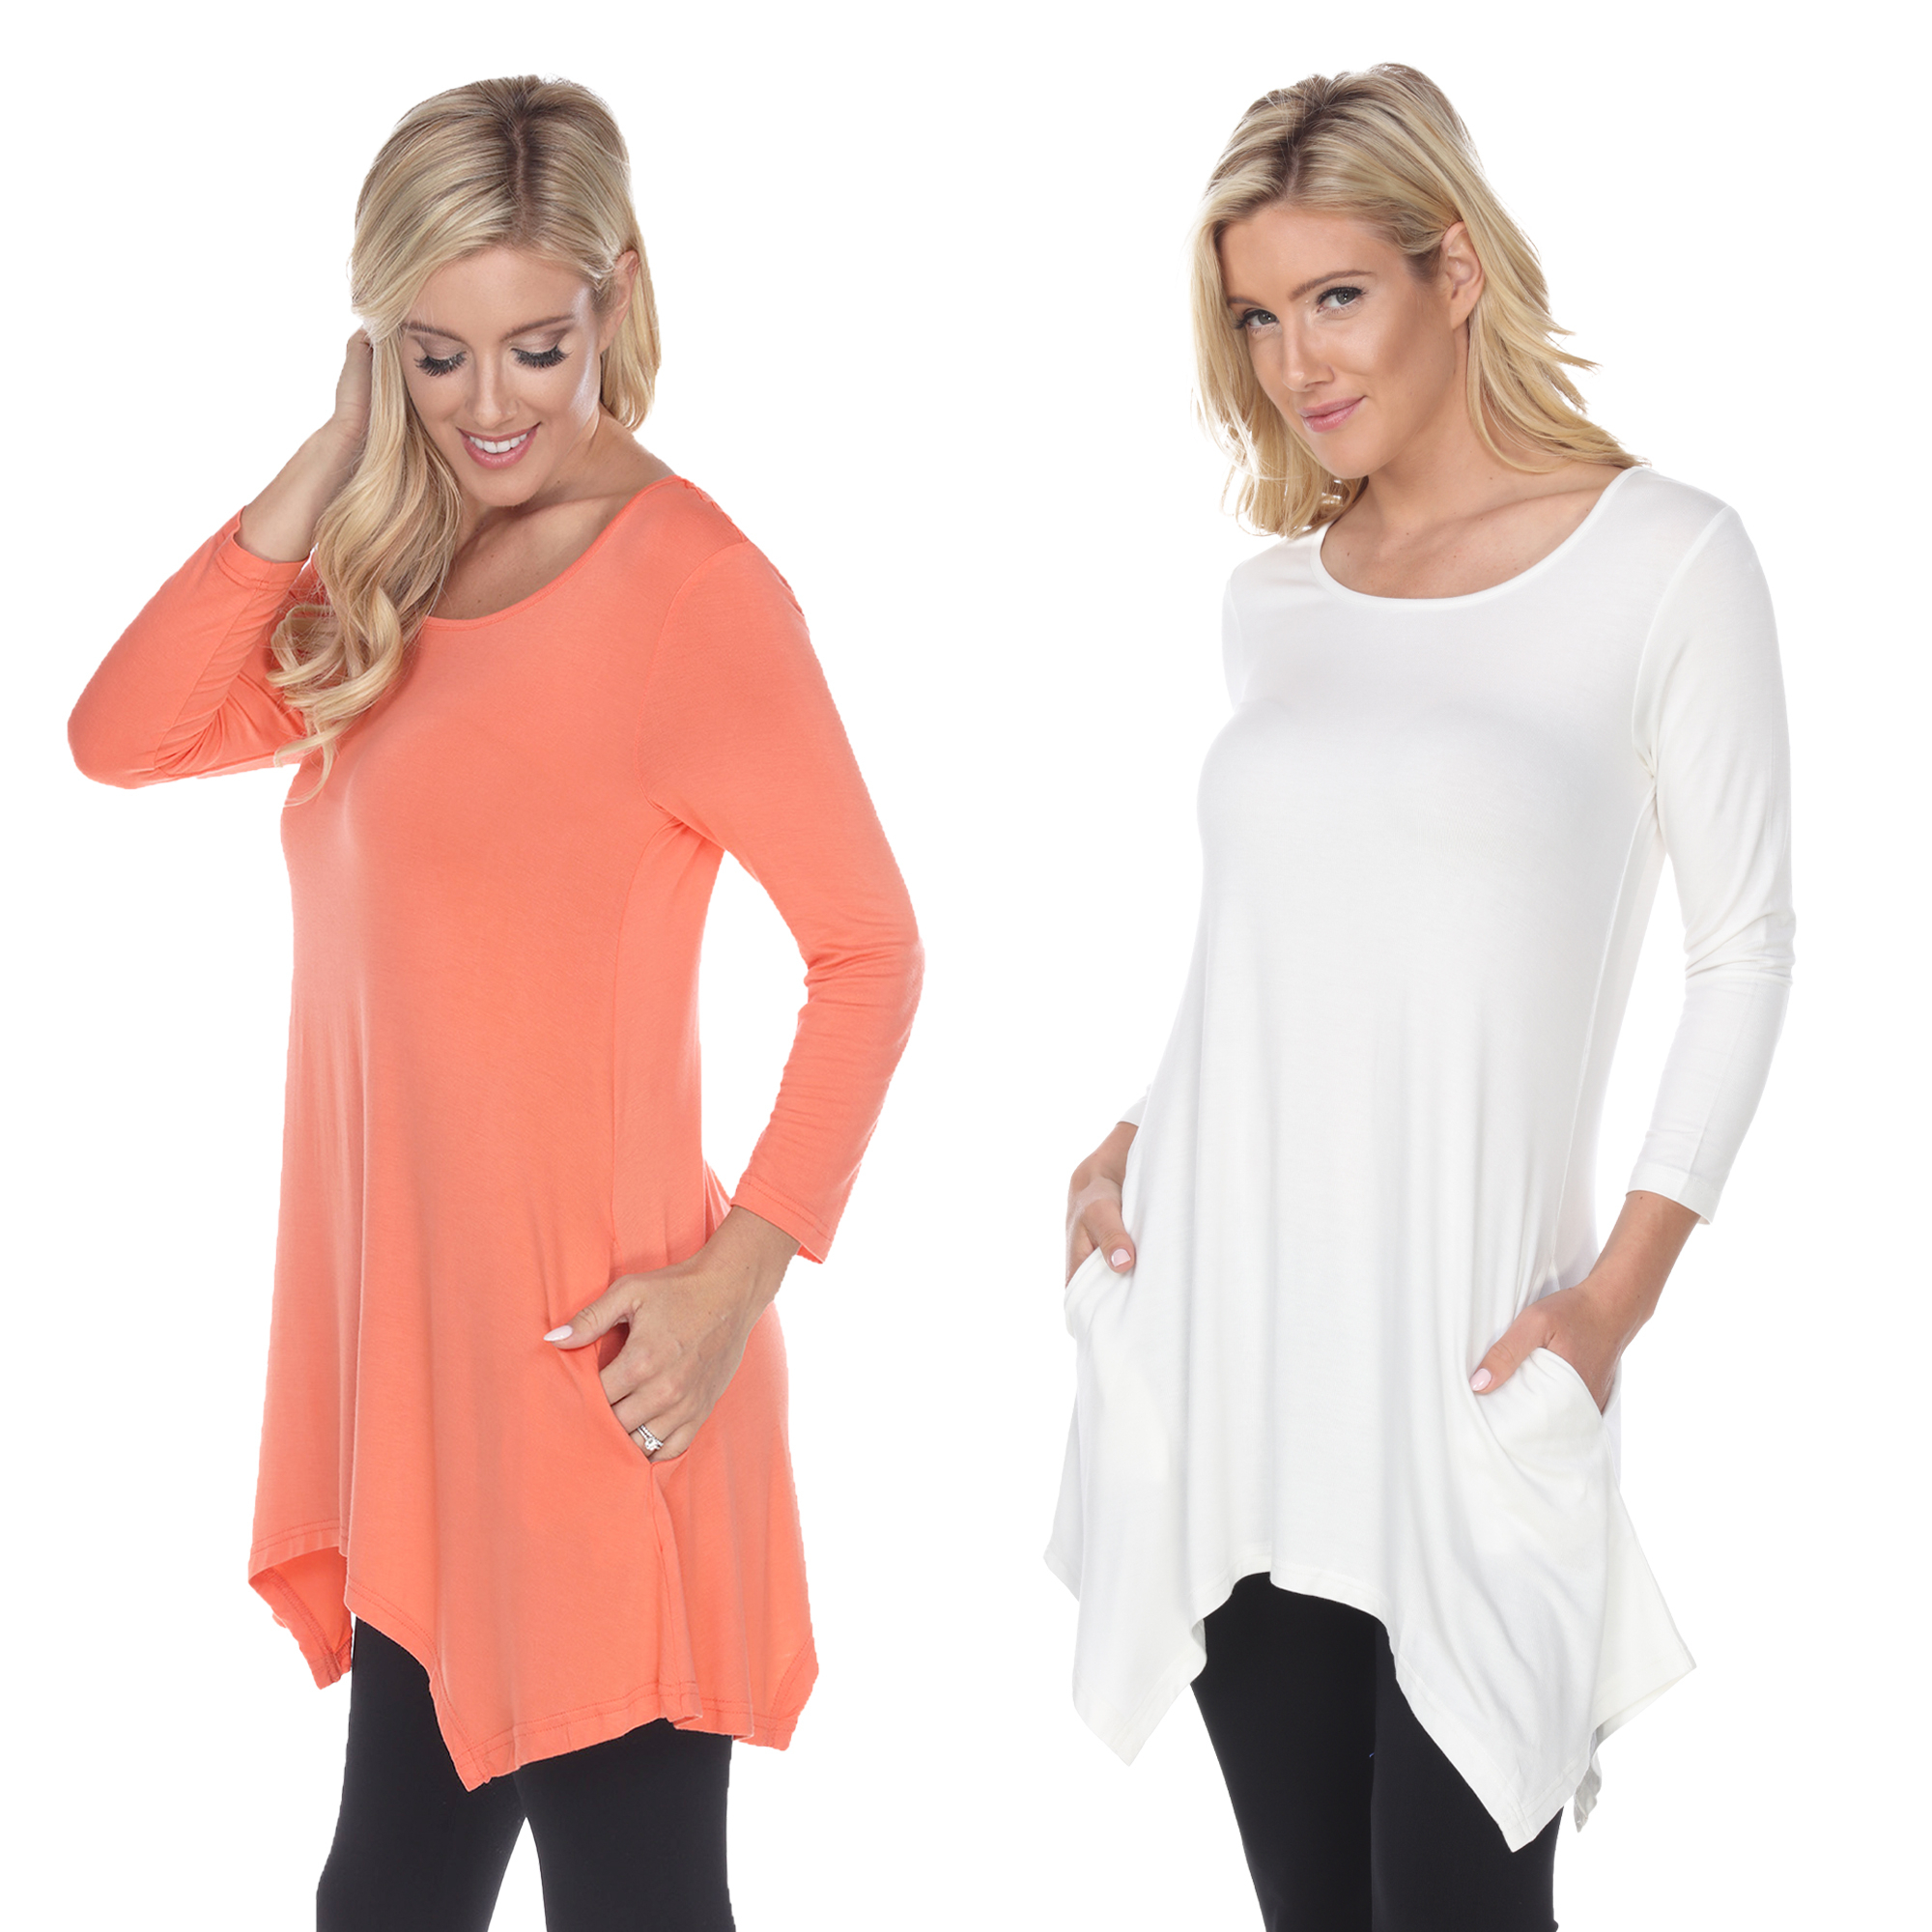 White Mark Women's Pack Of 2 White Tunic Top - White, Coral, Large